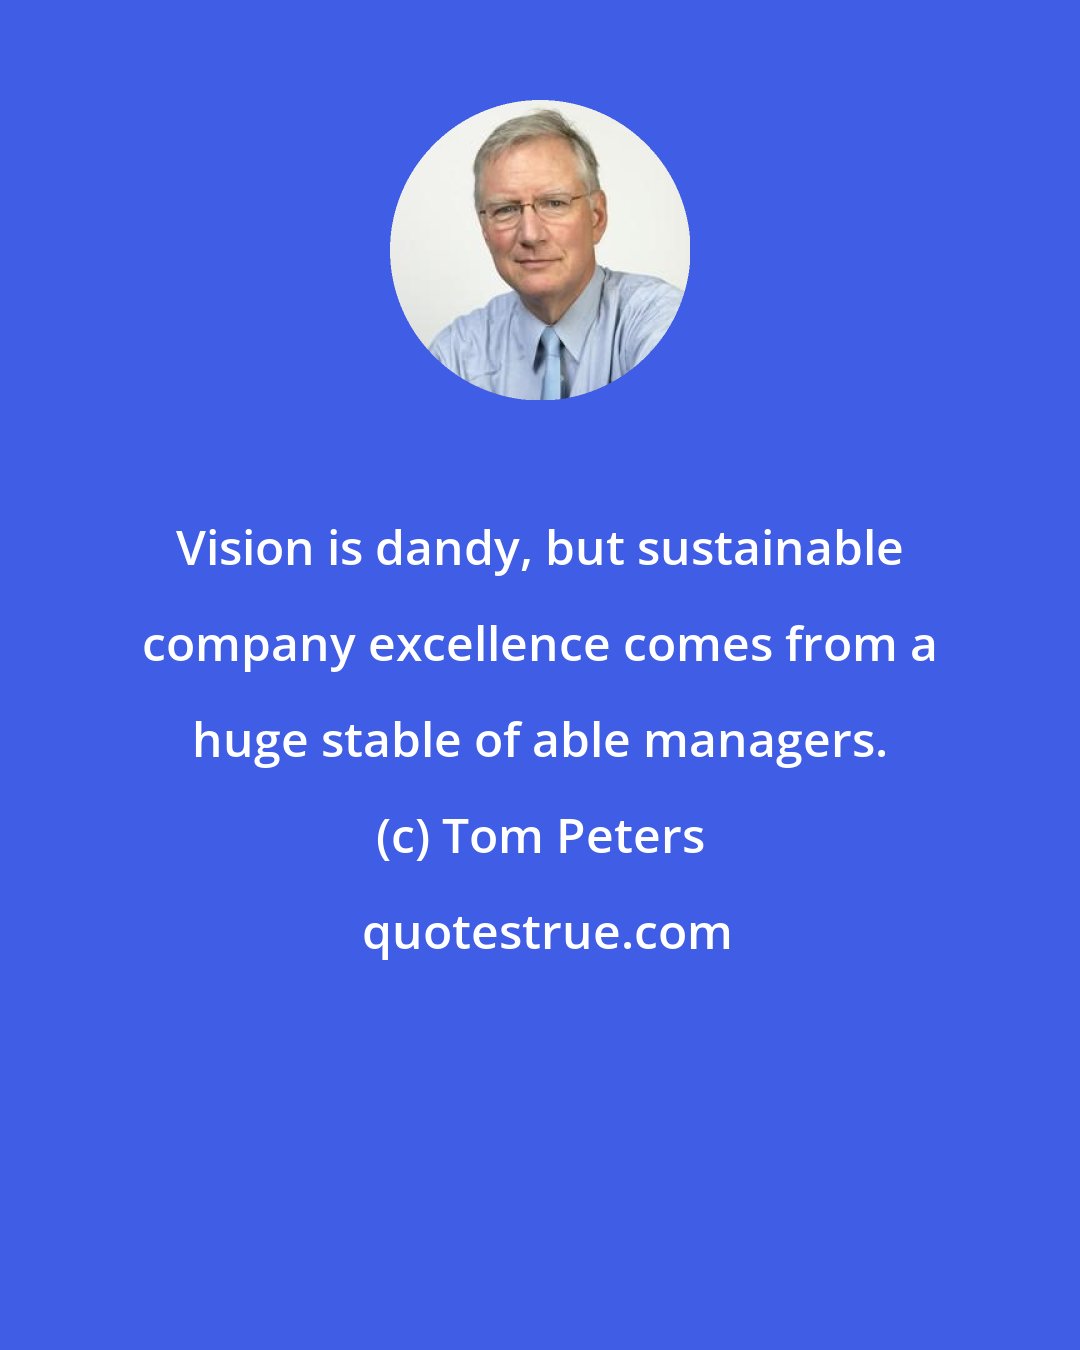 Tom Peters: Vision is dandy, but sustainable company excellence comes from a huge stable of able managers.